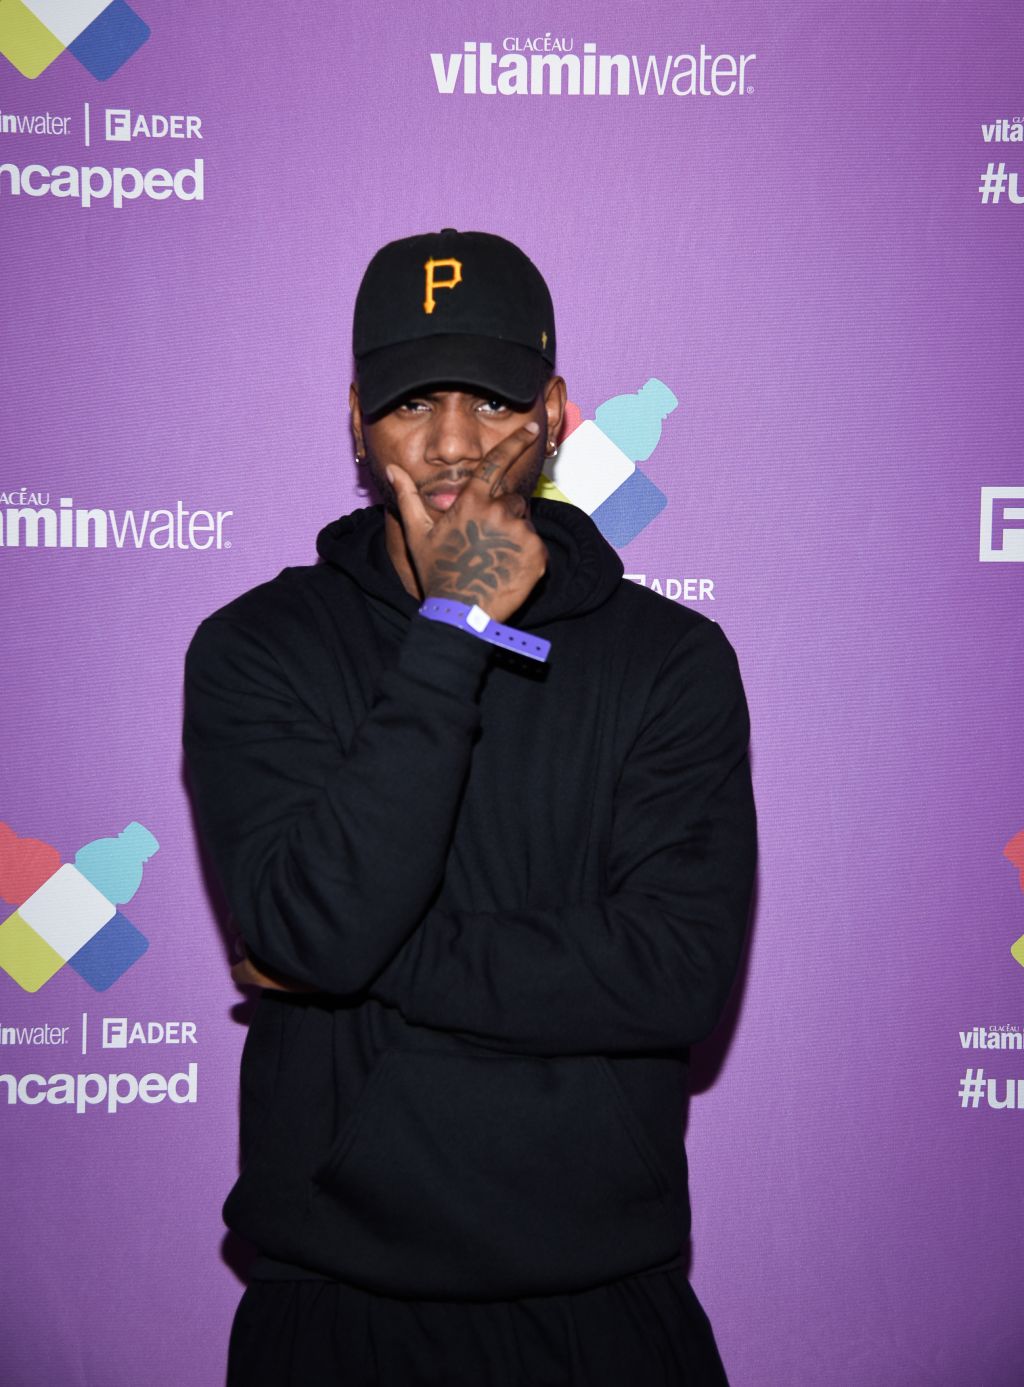 vitaminwater And The Fader Unite To 'HYDRATE THE HUSTLE' For Fifth Anniversary Of #uncapped Concert Series